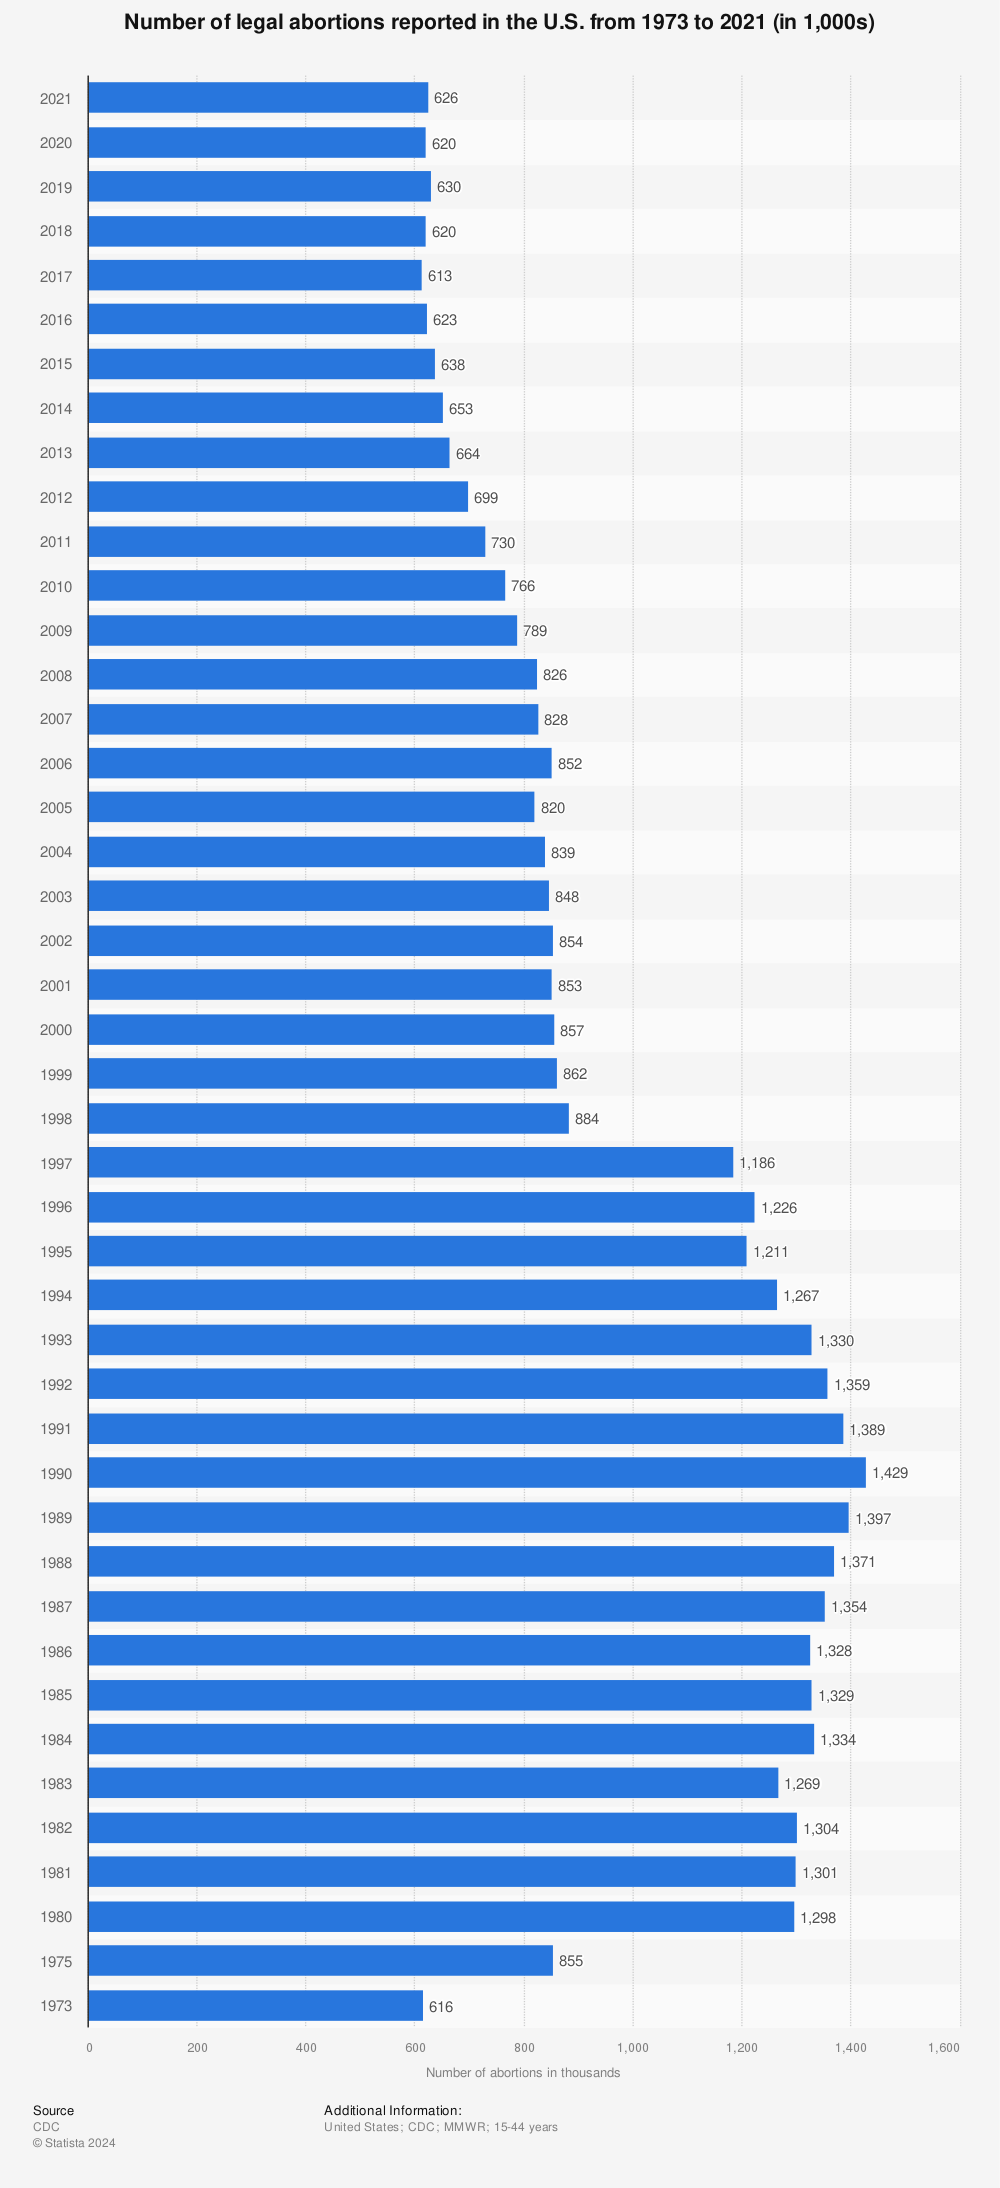 Statistic: Number of legal abortions reported in the U.S. from 1973 to 2021 (in 1,000s) | Statista